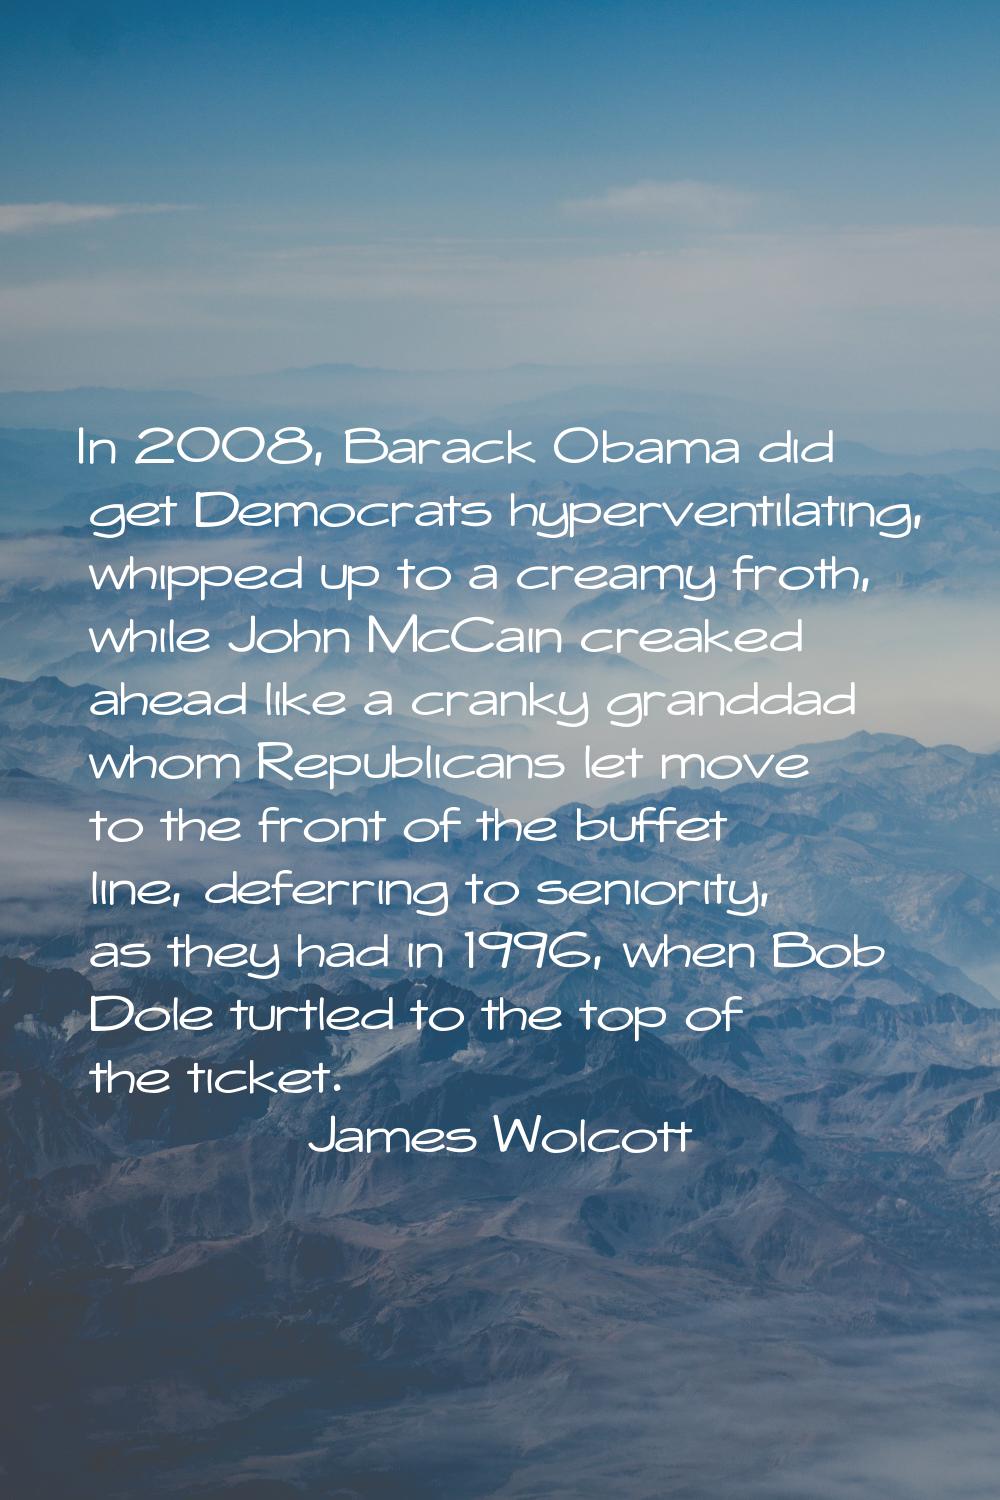 In 2008, Barack Obama did get Democrats hyperventilating, whipped up to a creamy froth, while John 